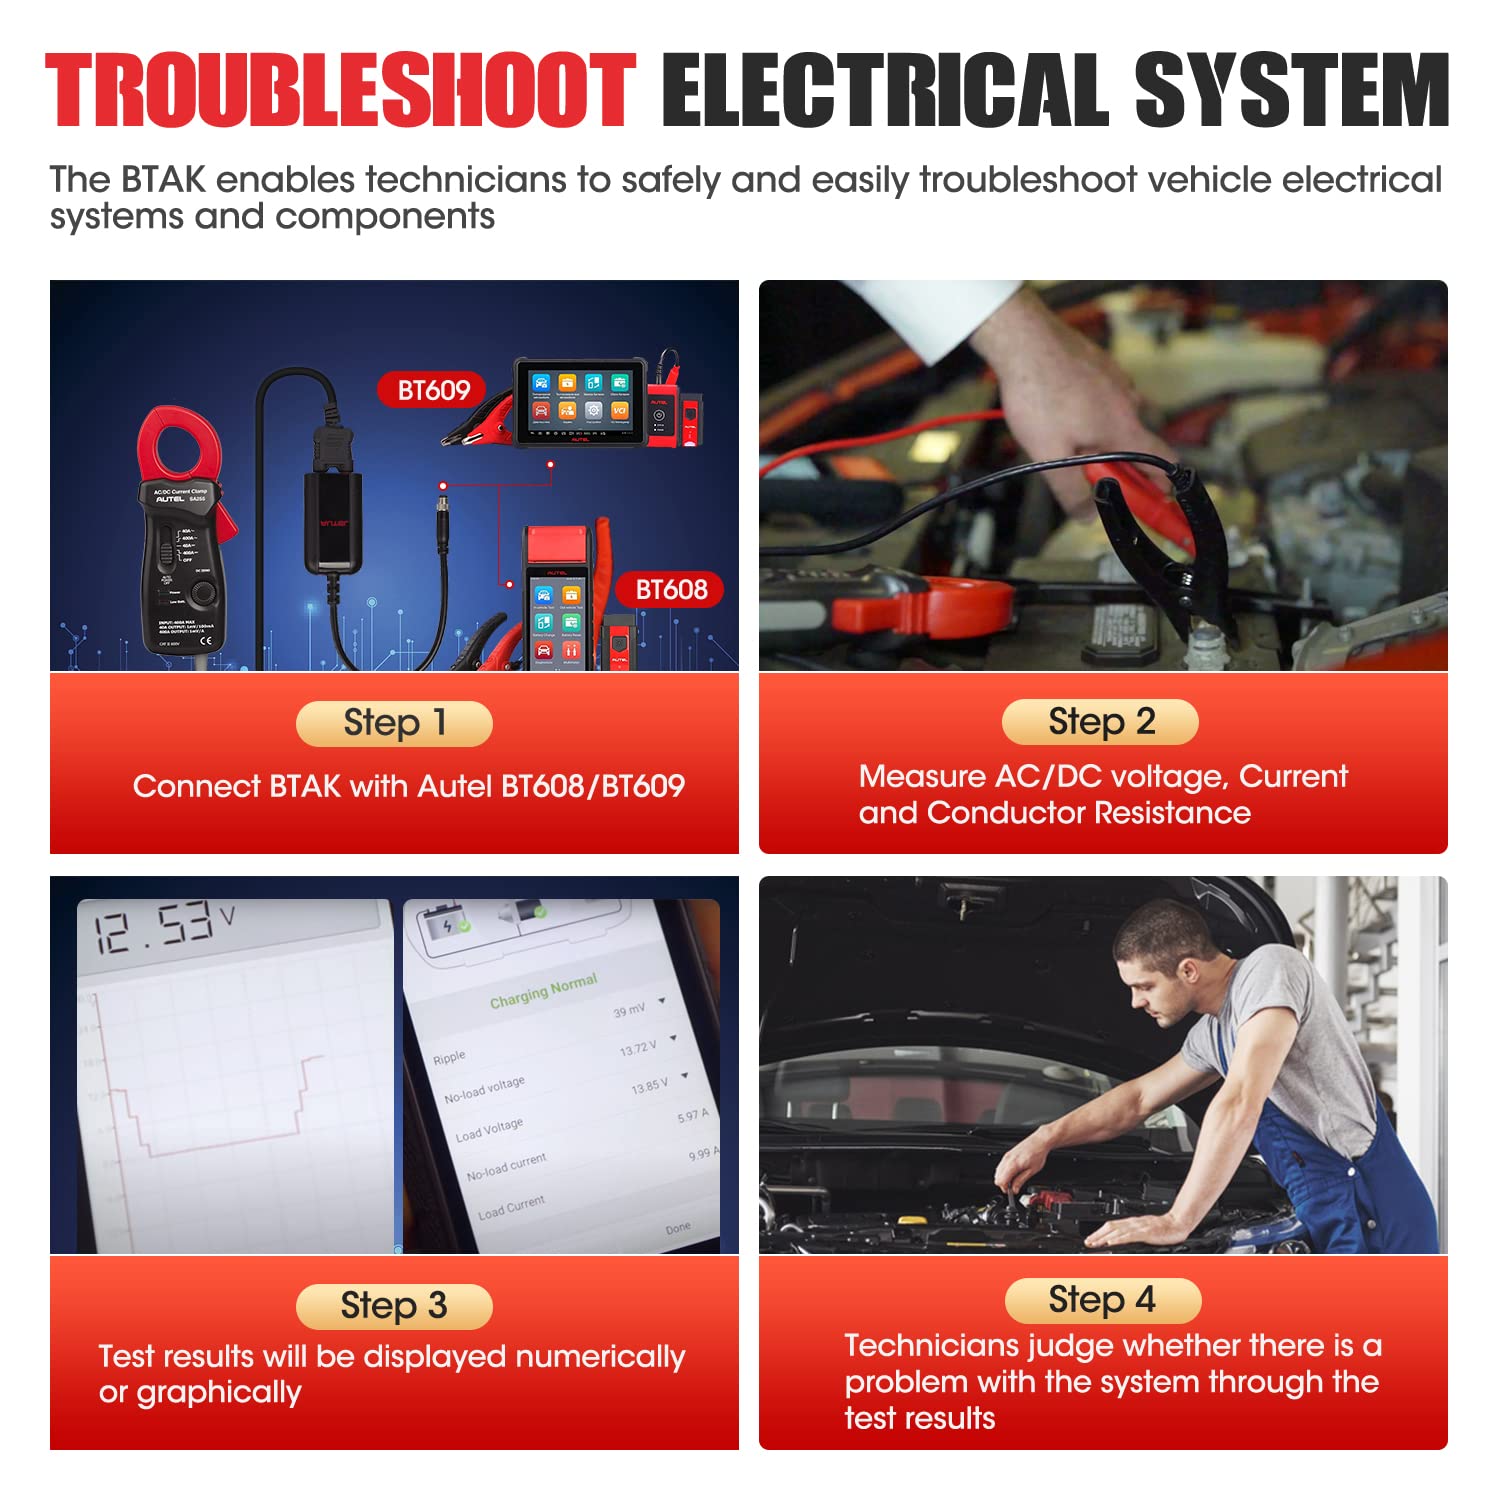 Troubleshoot ELECT System